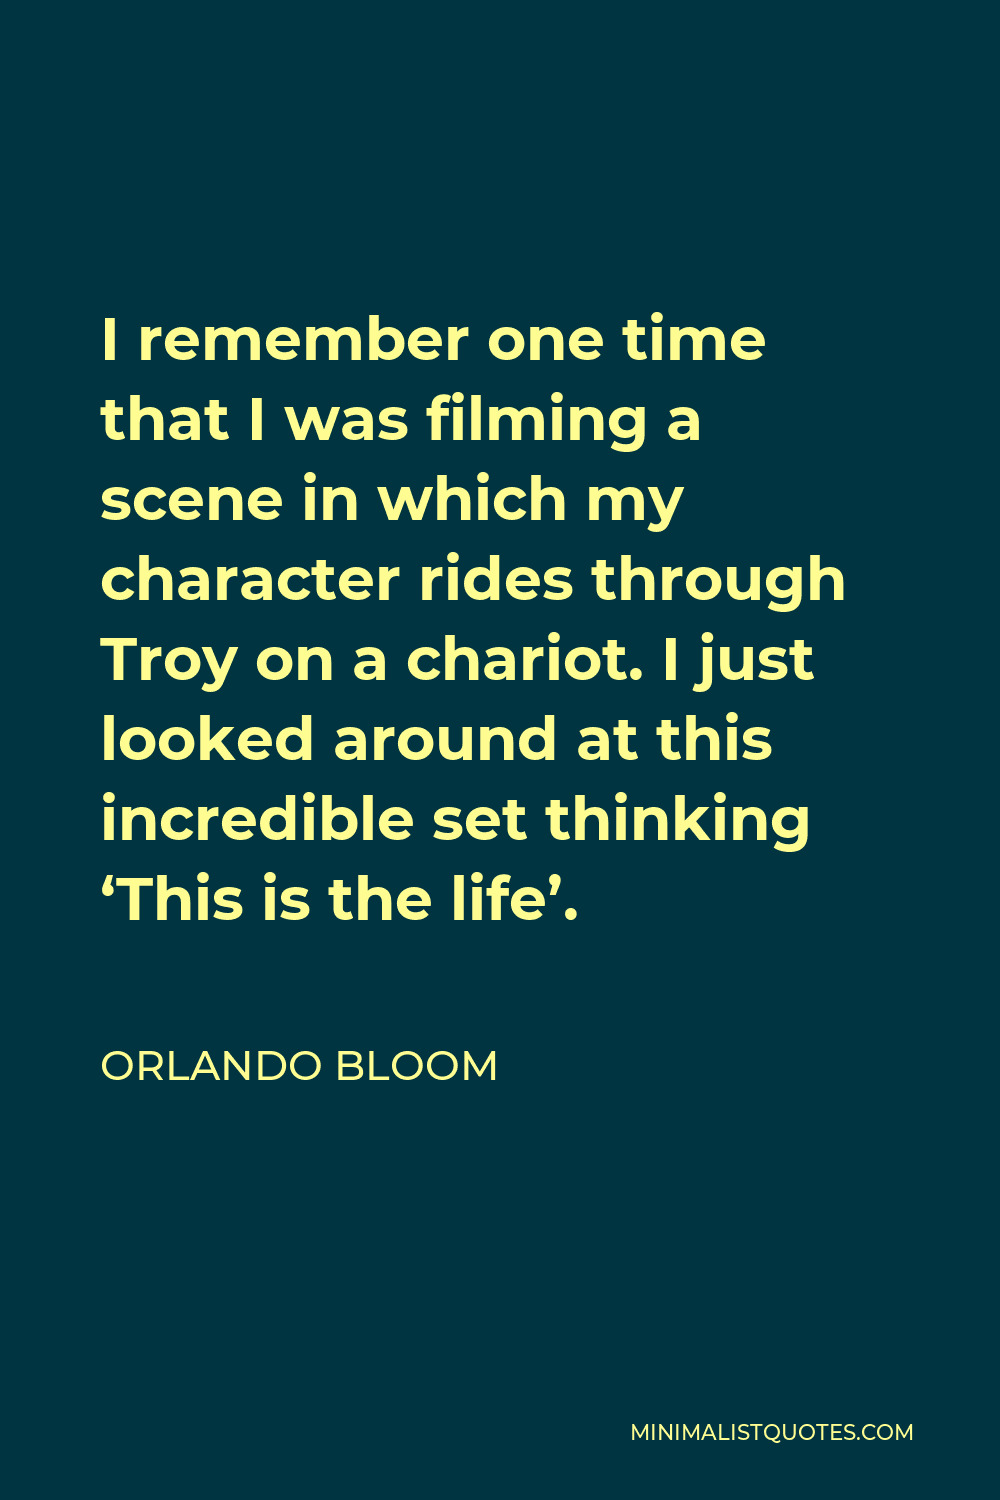 Orlando Bloom Quote - I remember one time that I was filming a scene in which my character rides through Troy on a chariot. I just looked around at this incredible set thinking ‘This is the life’.